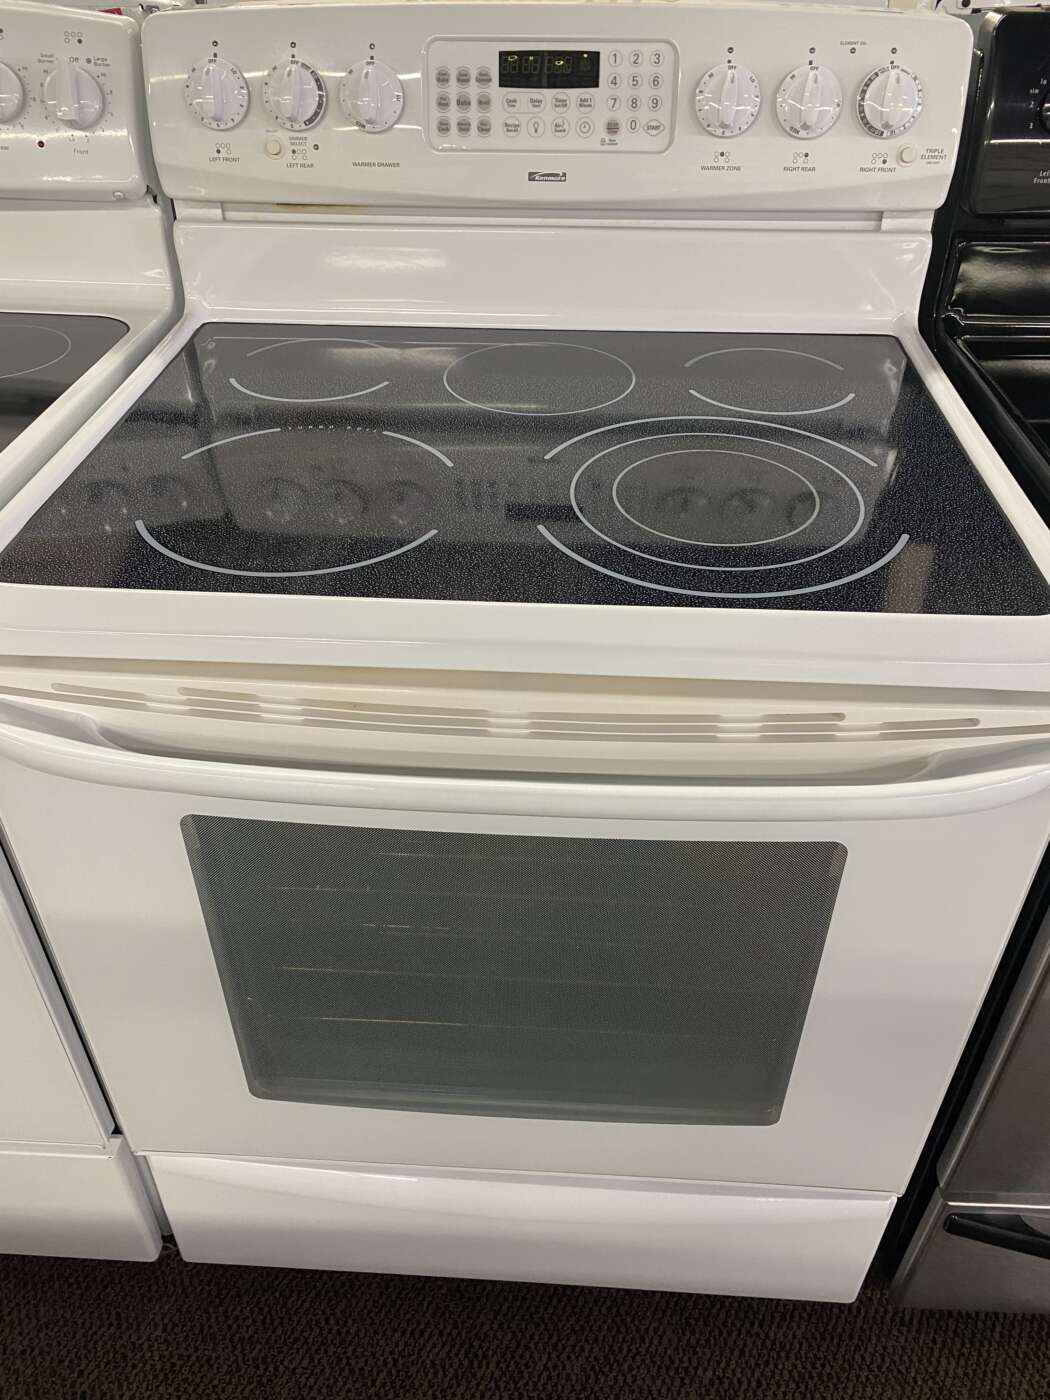 Reconditioned KENMORE Electric Range with Convection and Warming Drawer